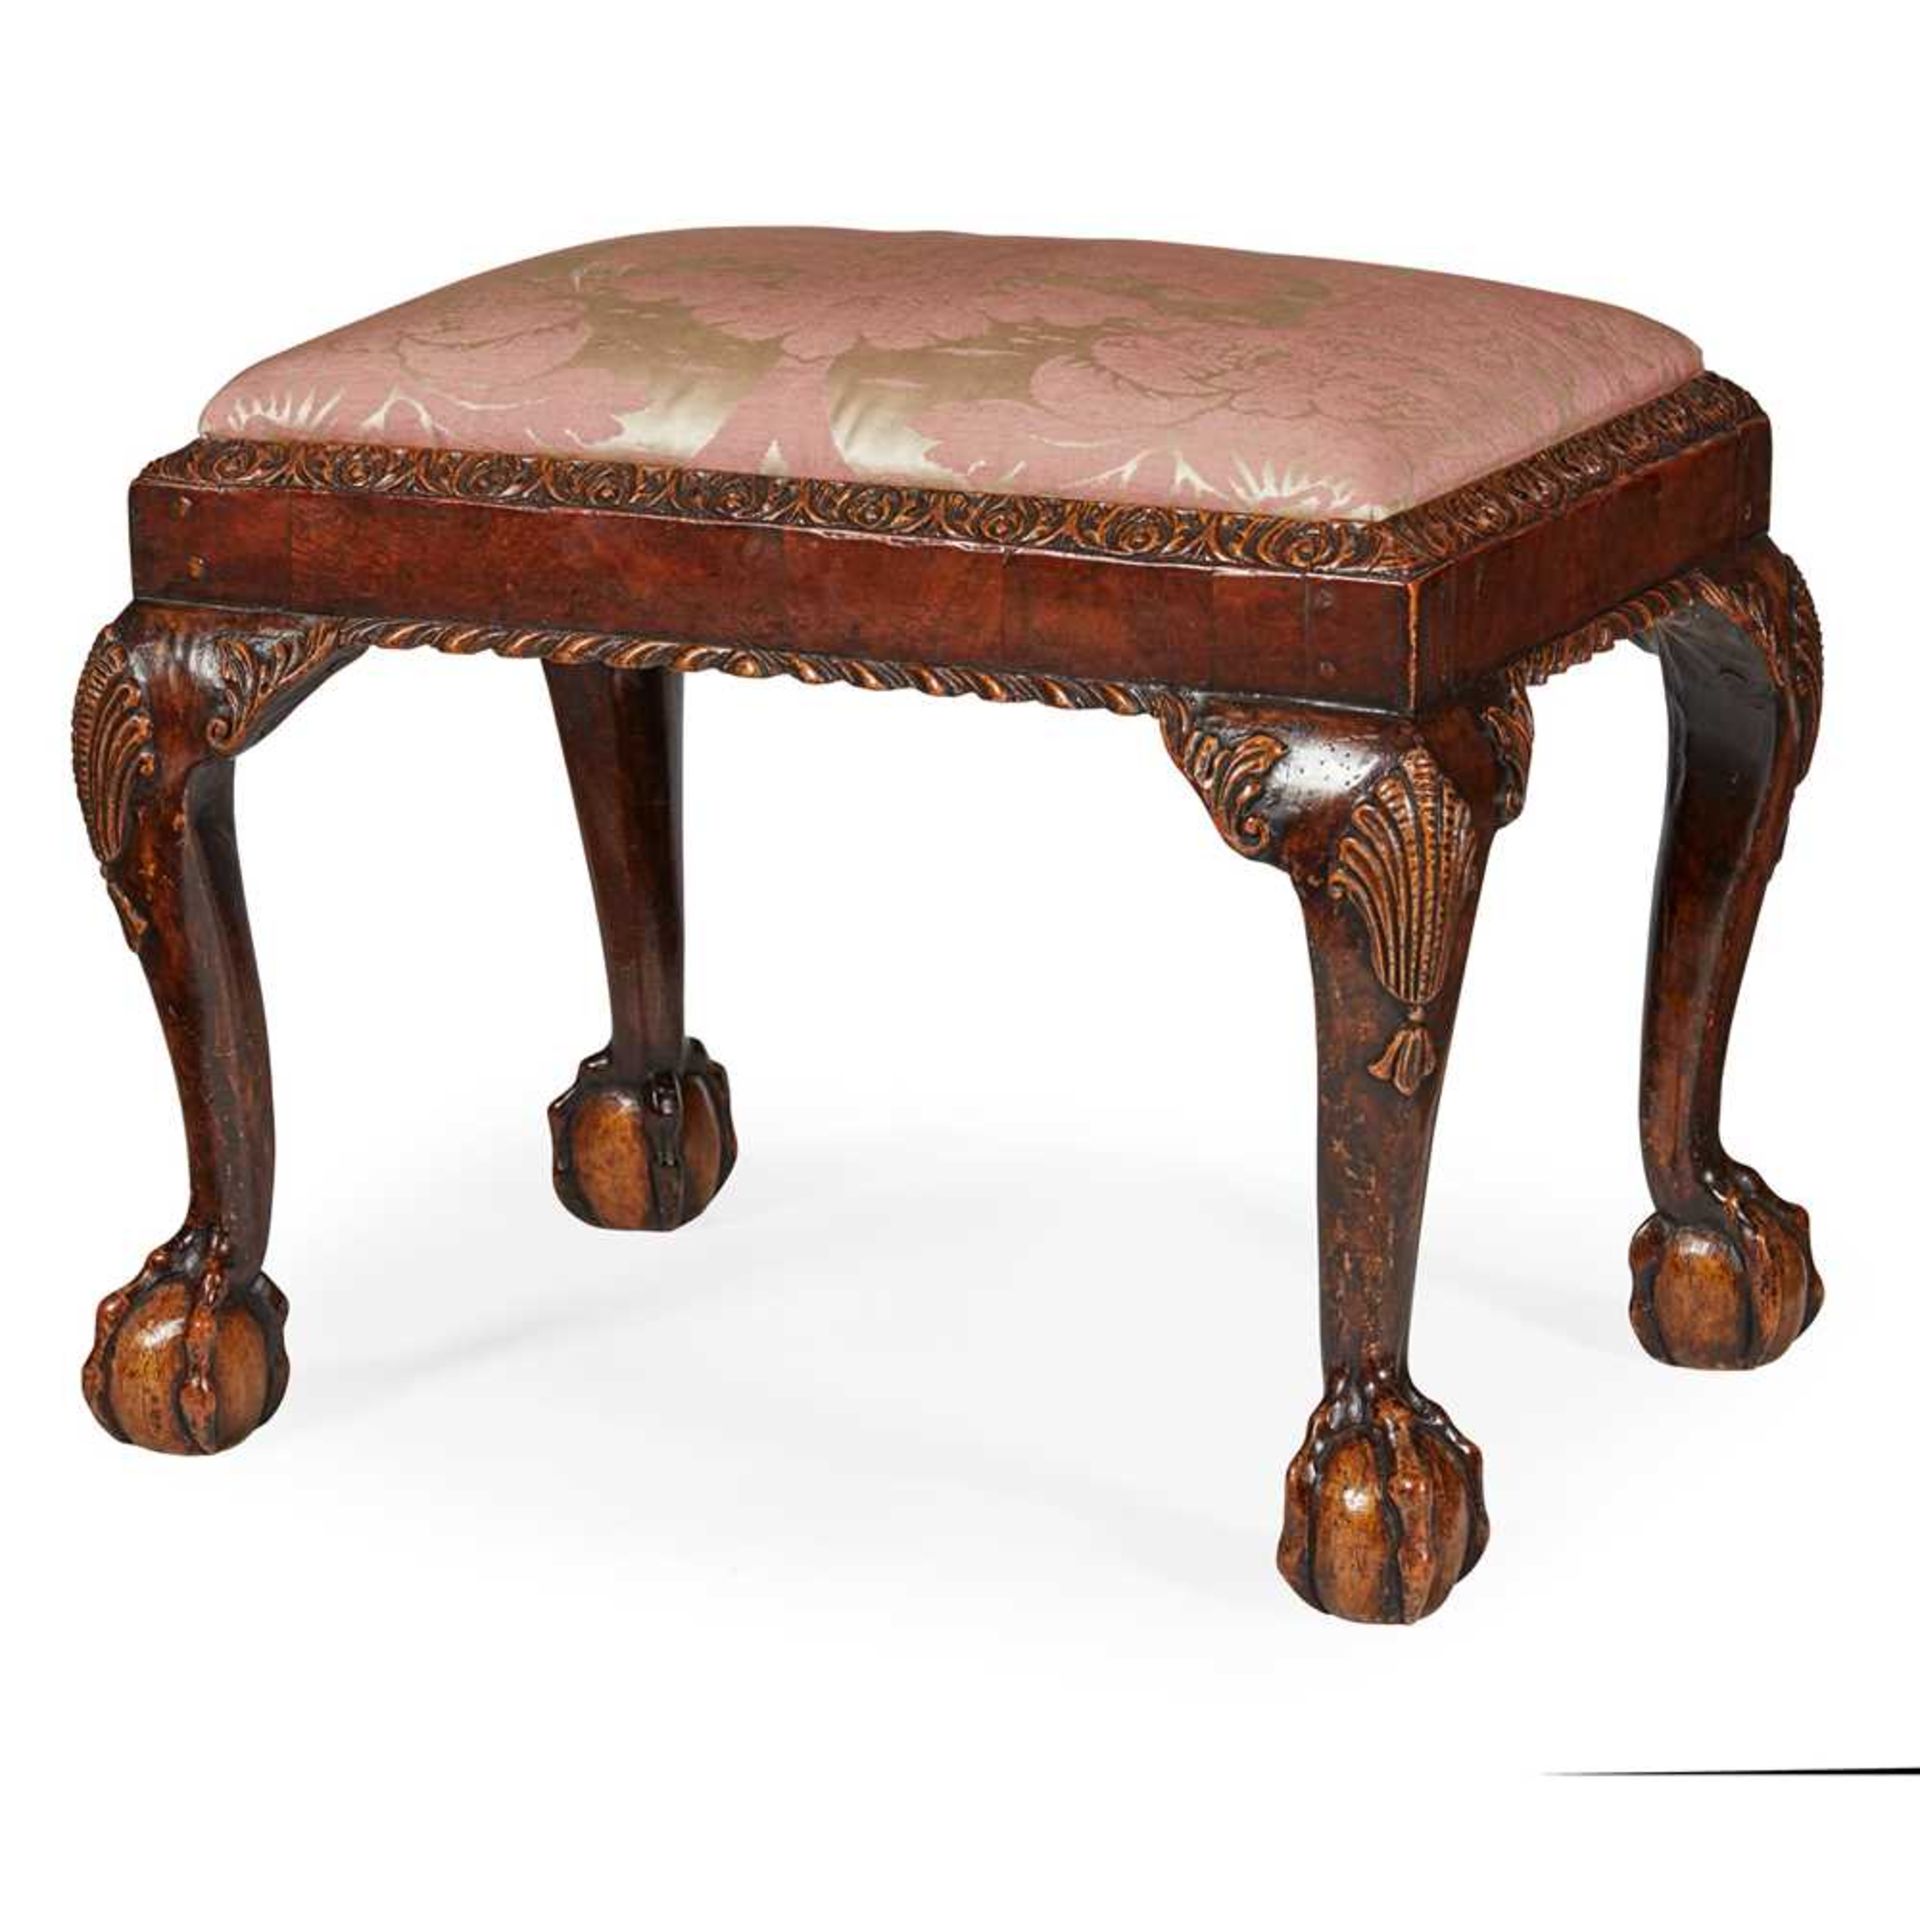 GEORGE II STYLE MAHOGANY AND PARCEL GILT STOOL 19TH CENTURY